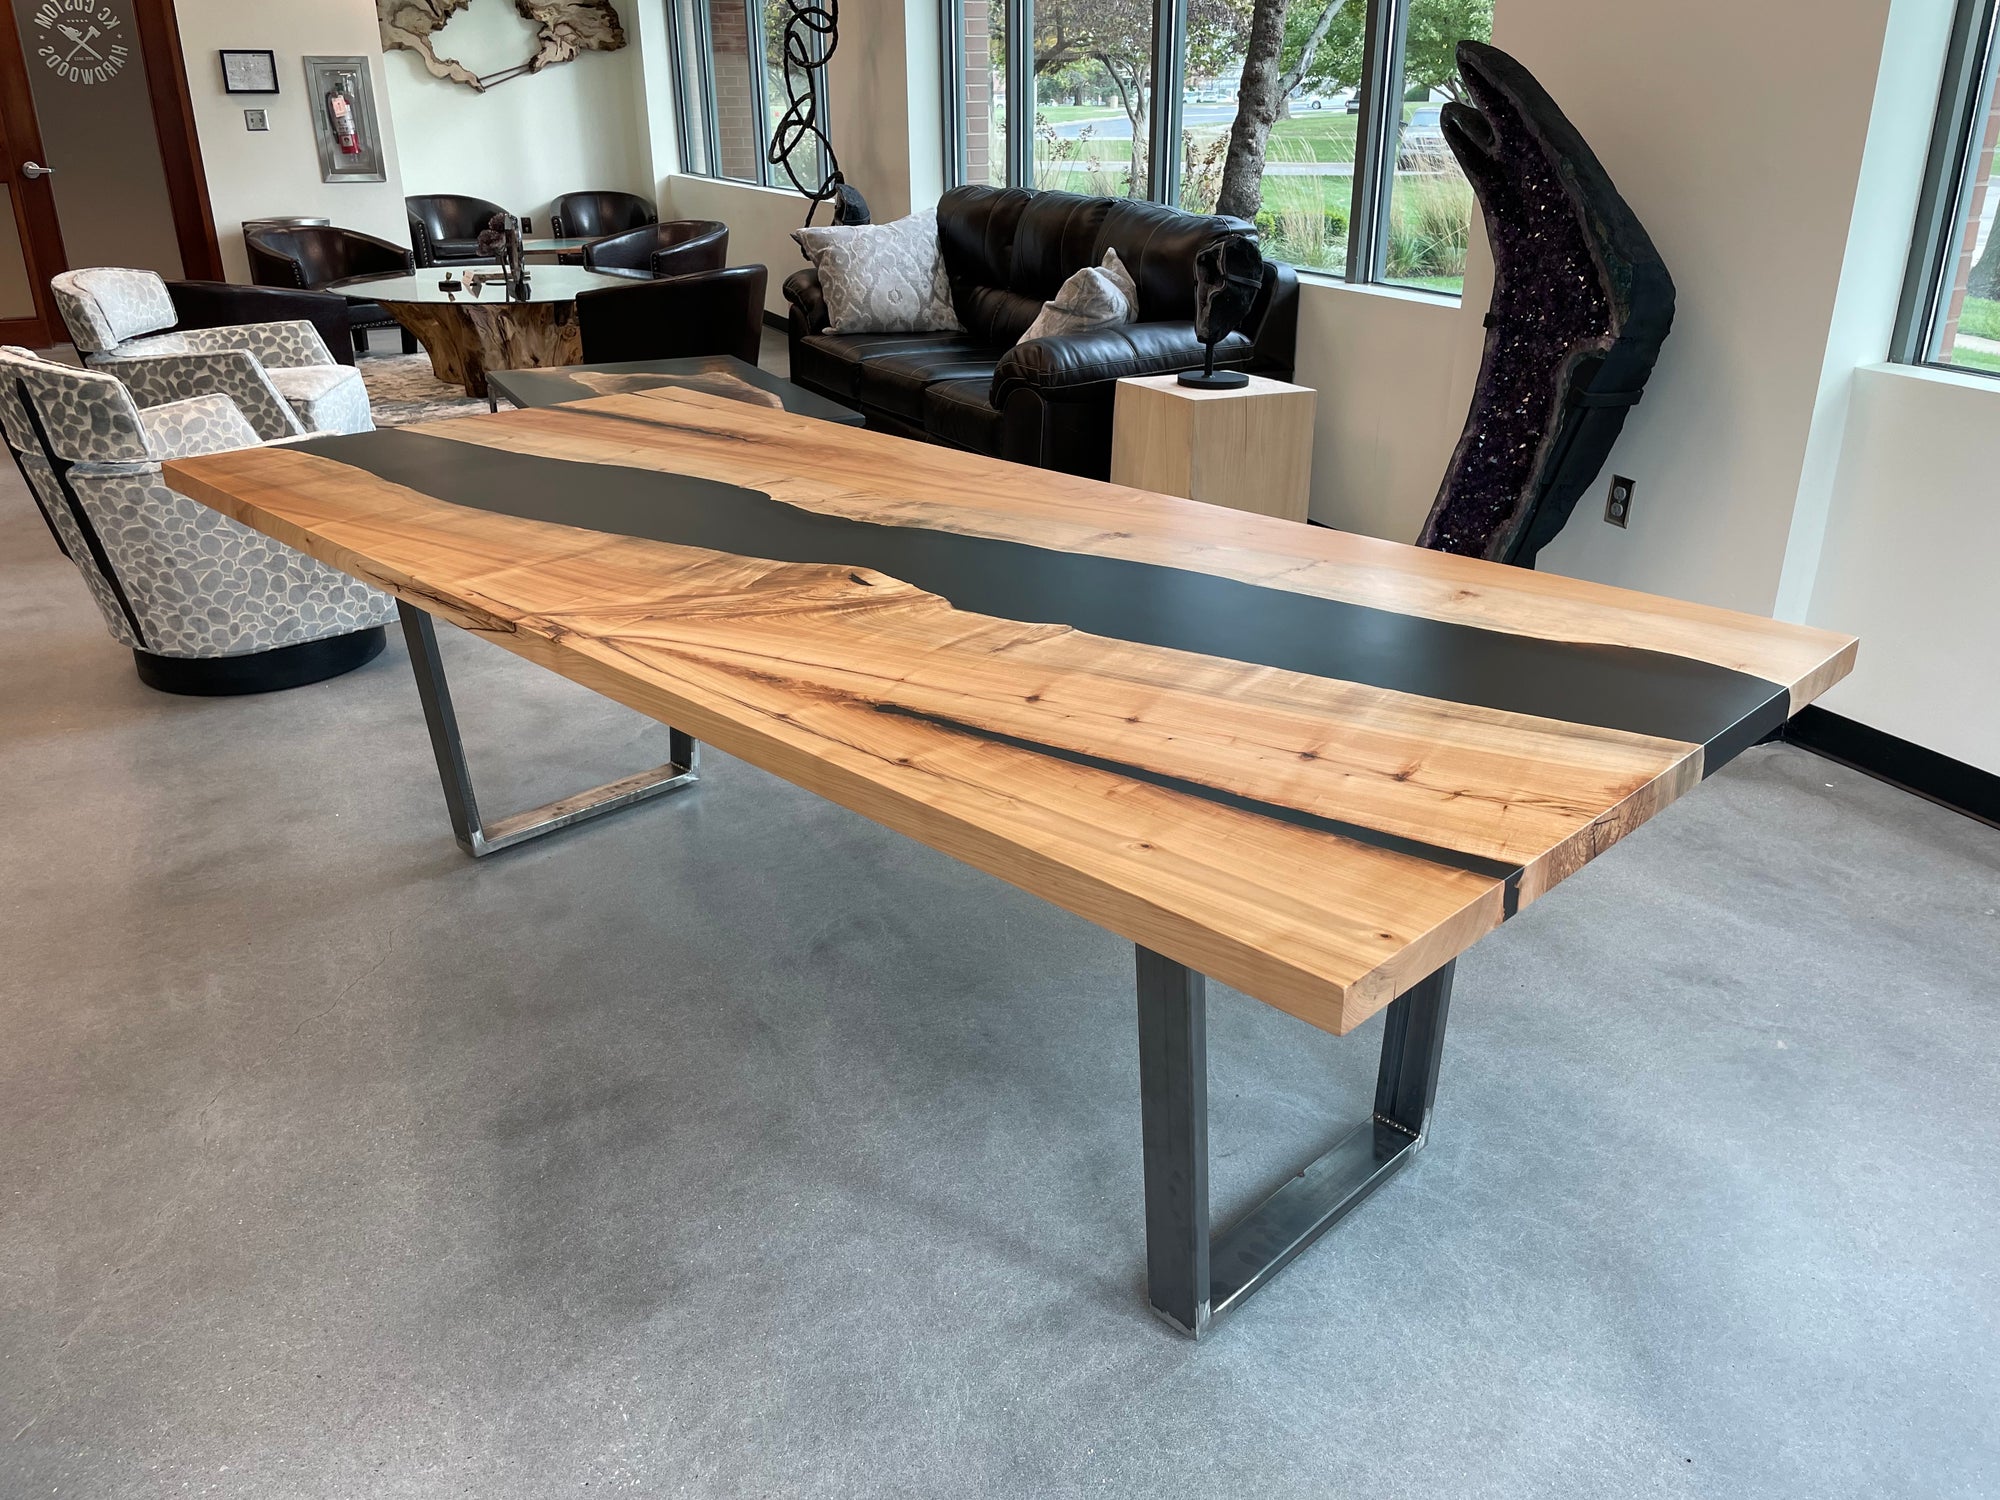 Maple Epoxy River Dining Table with Smokey Epoxy (8' long)